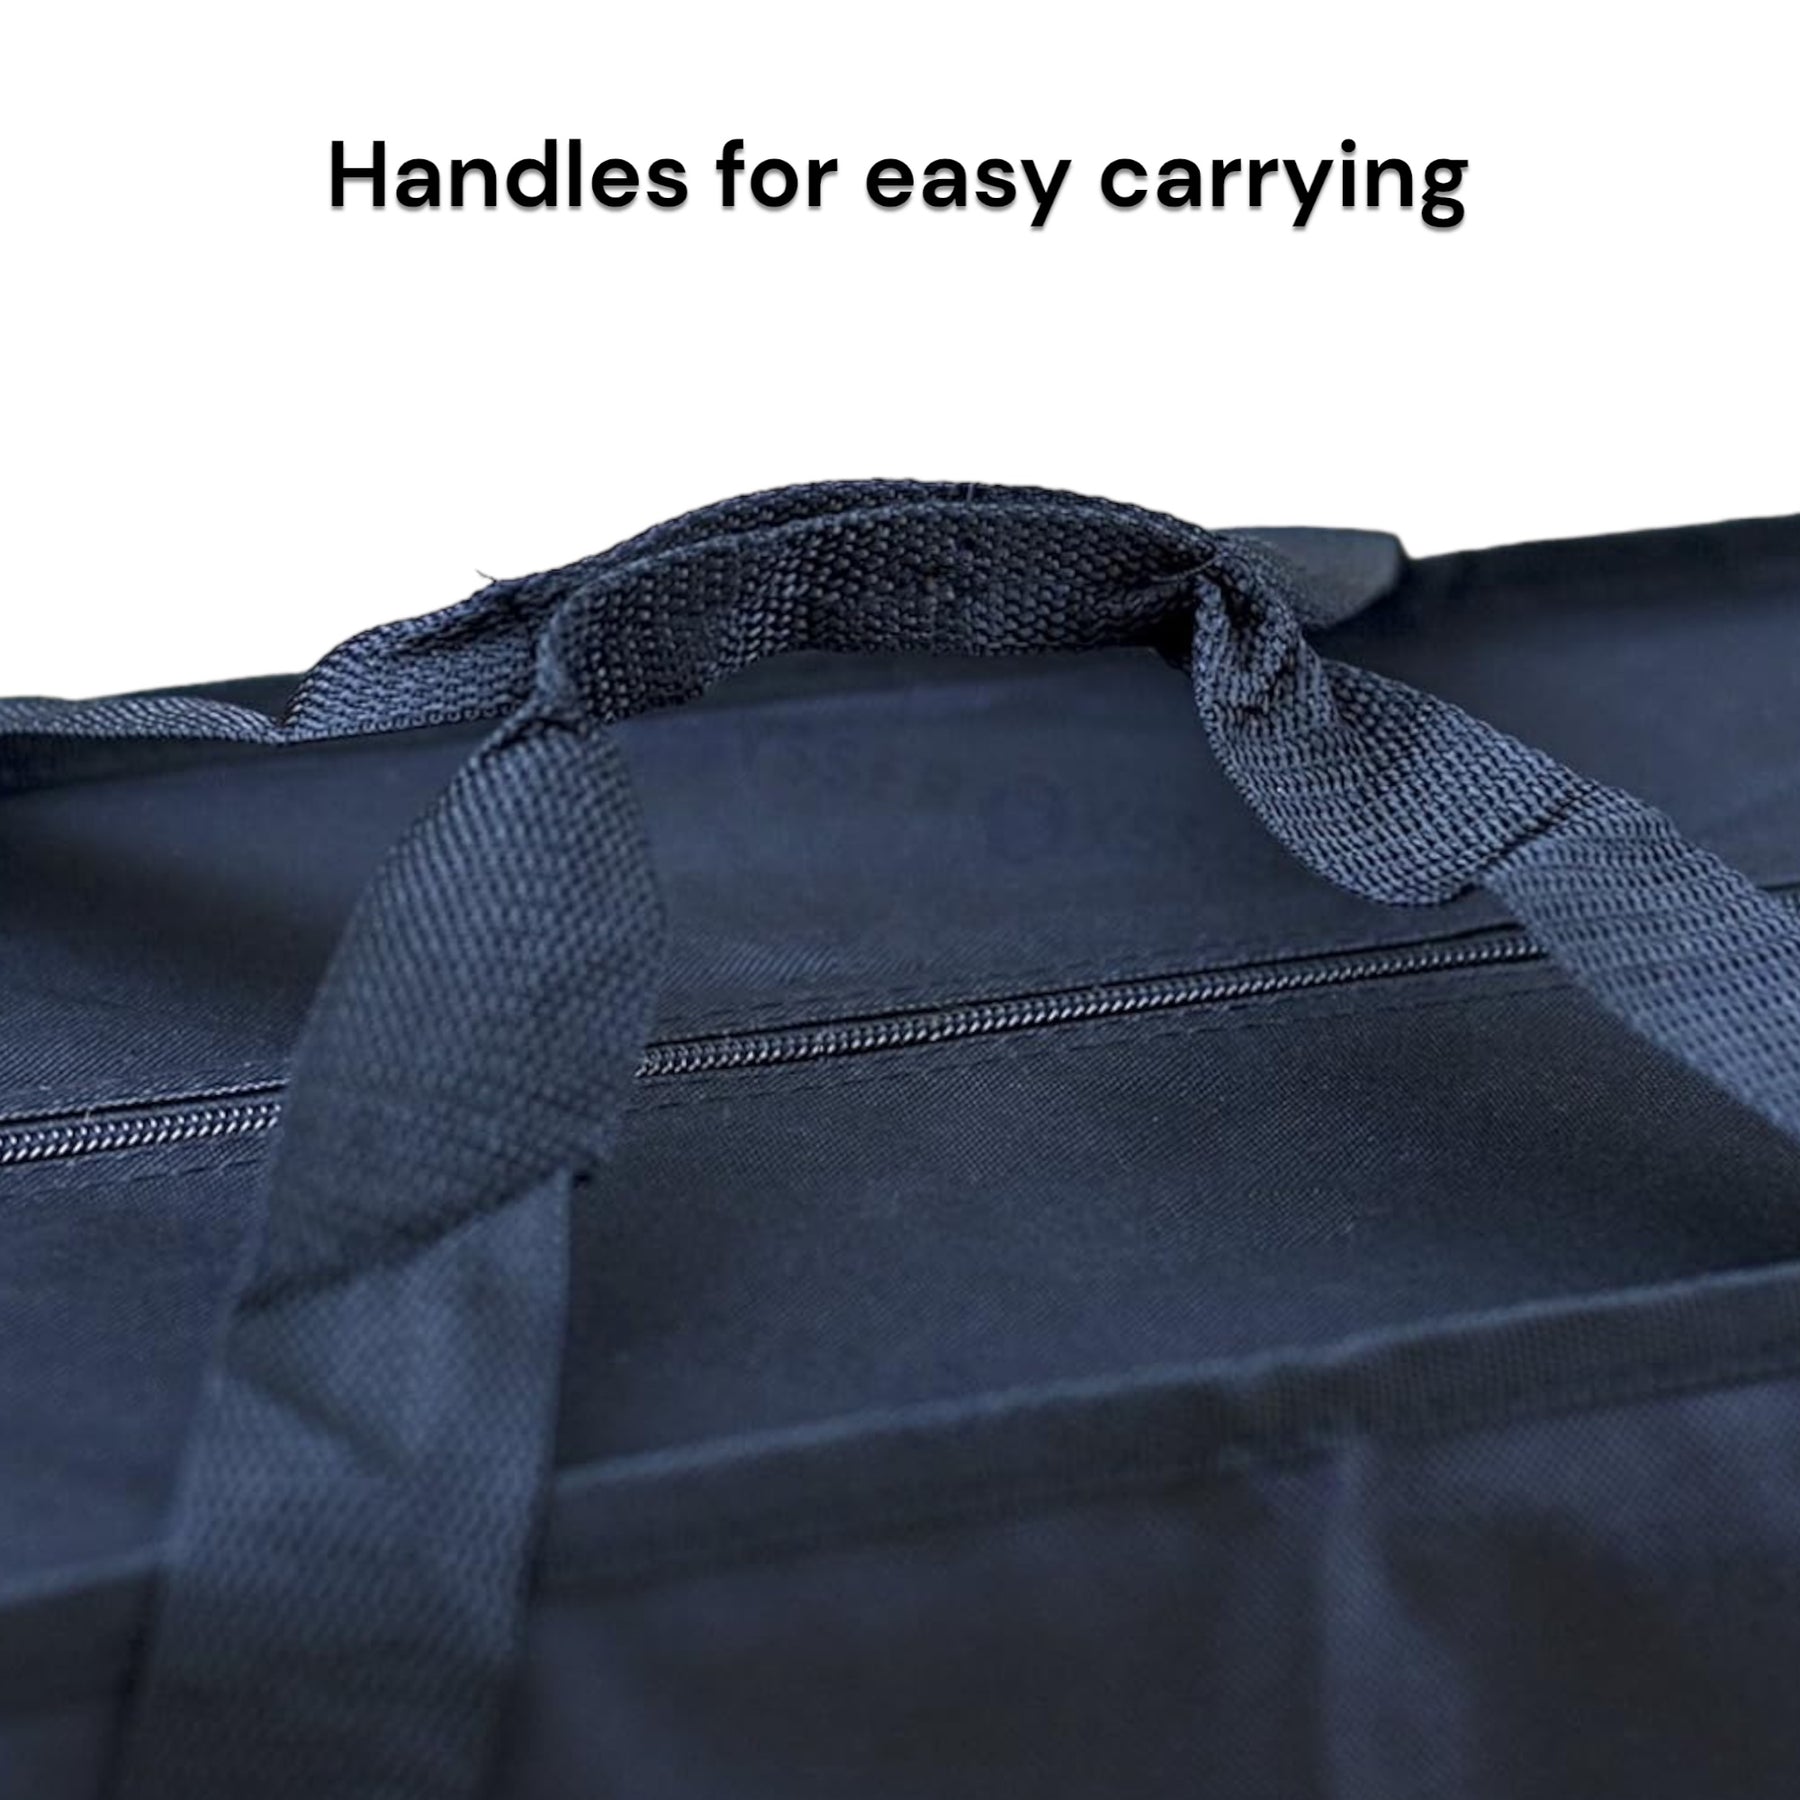 Travel Duffle Bags for 150lbs Available in Black